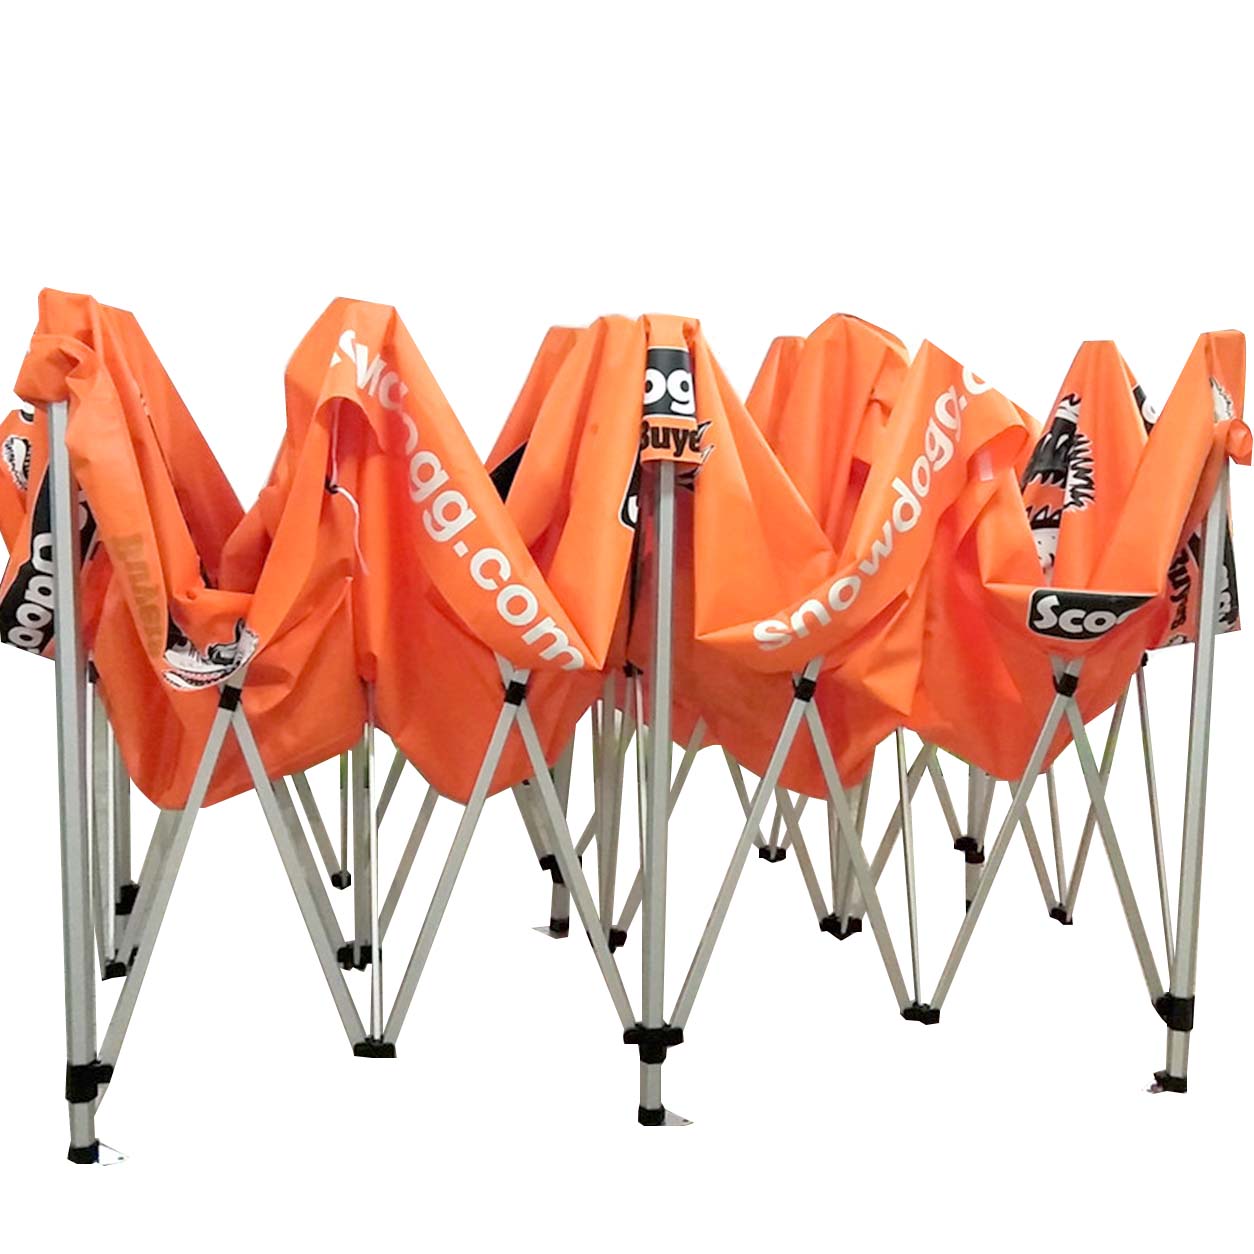 FeaMont OEM/ODM pop up canopy tent can-copy for sports-1